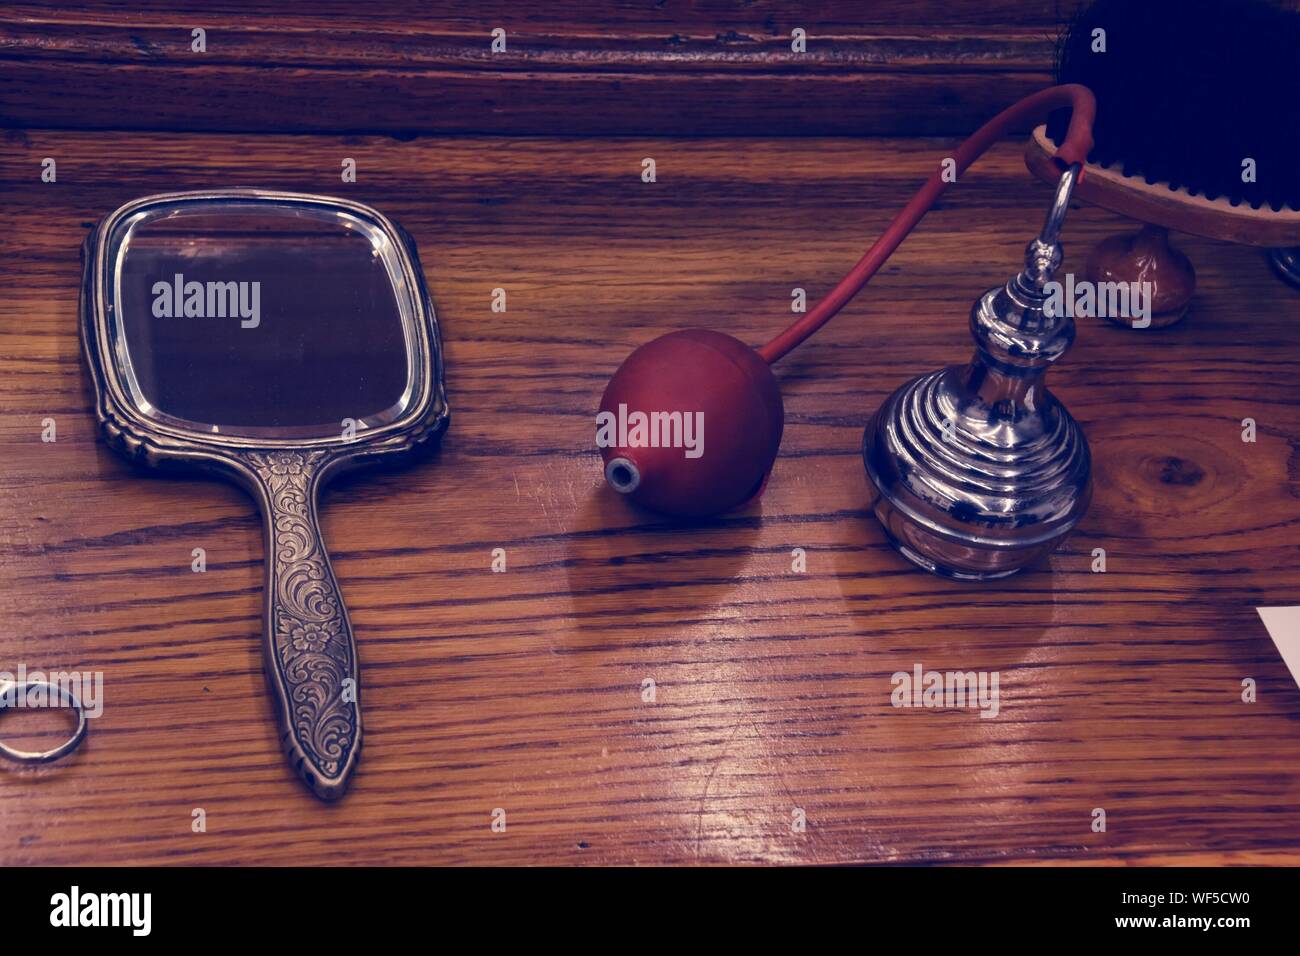 High Angle View Of Perfume Sprayer By Hand Mirror On Wooden Table At Barbershop Stock Photo